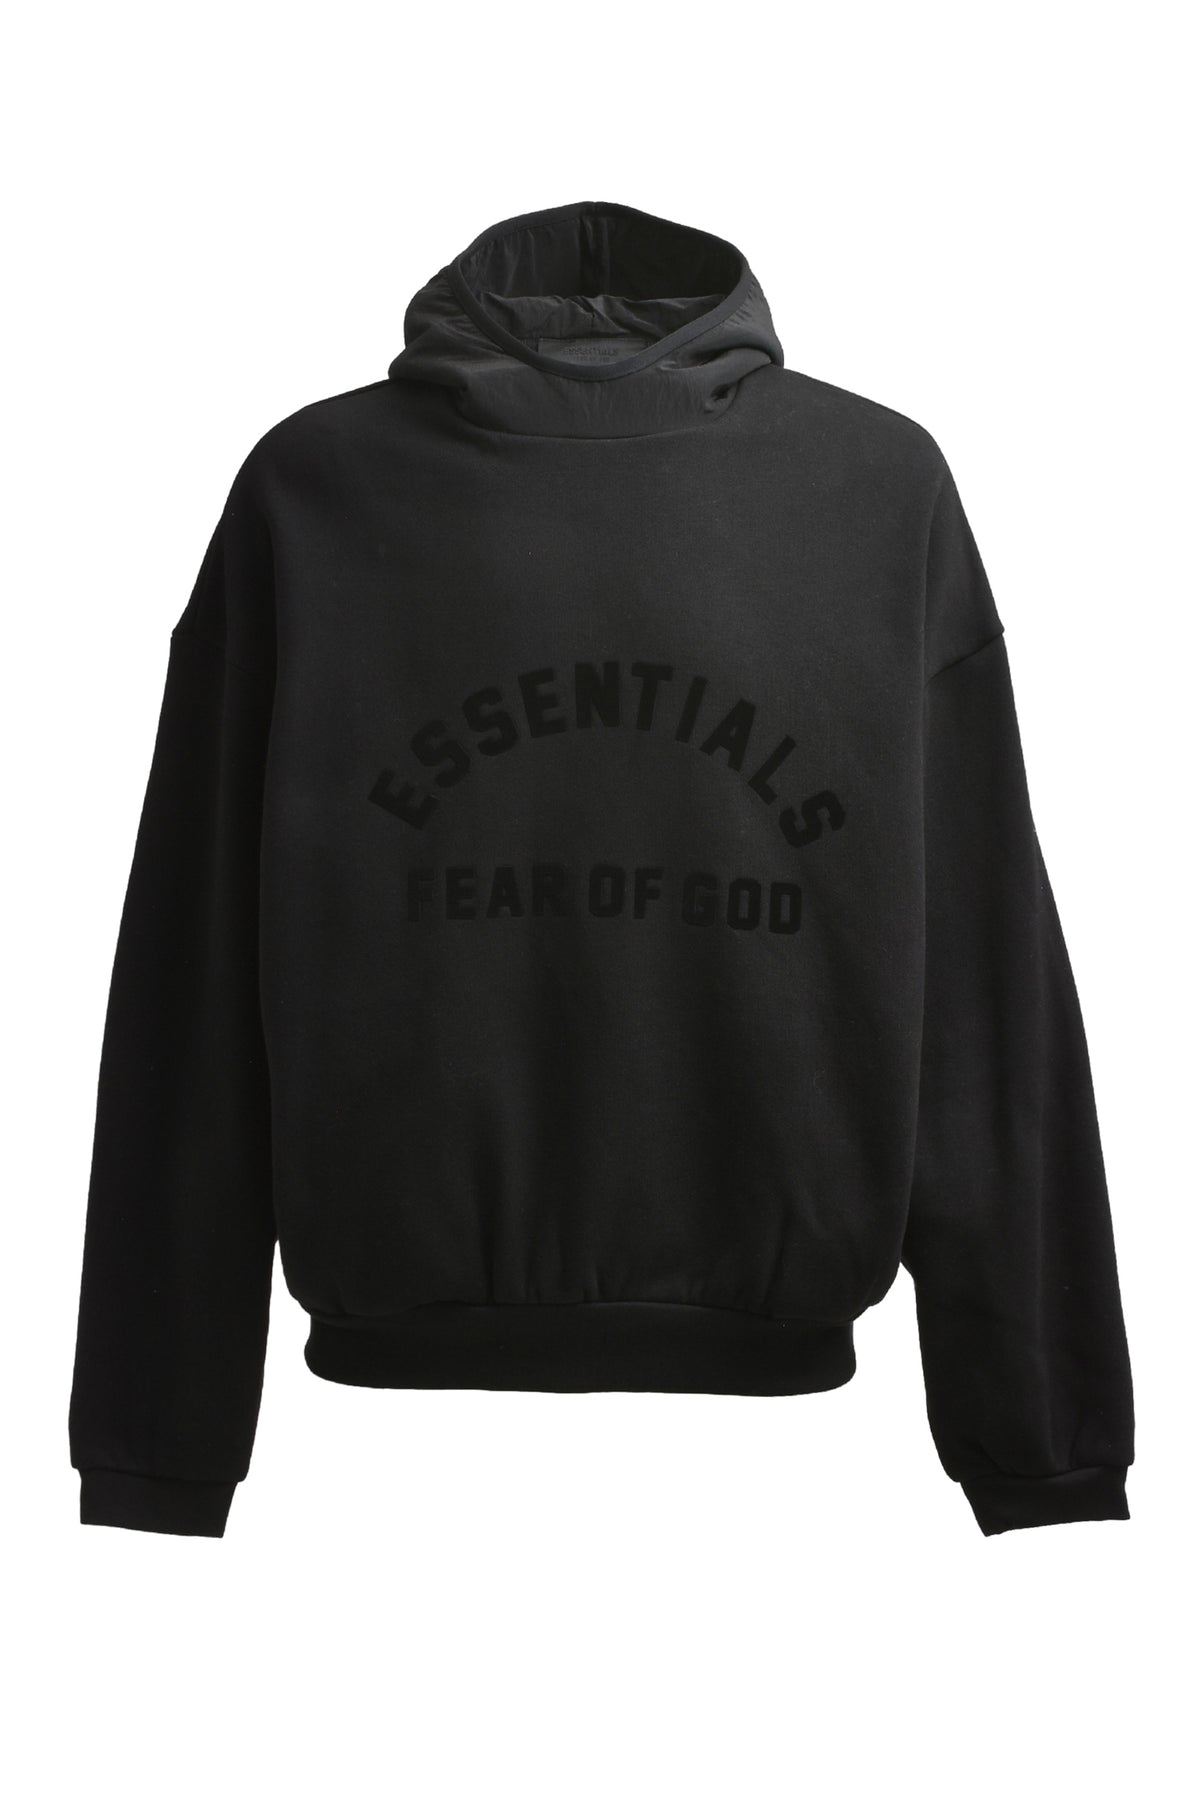 Essentials Clothing Sale & Outlet - Essentials Fear Of God Hoodie USA